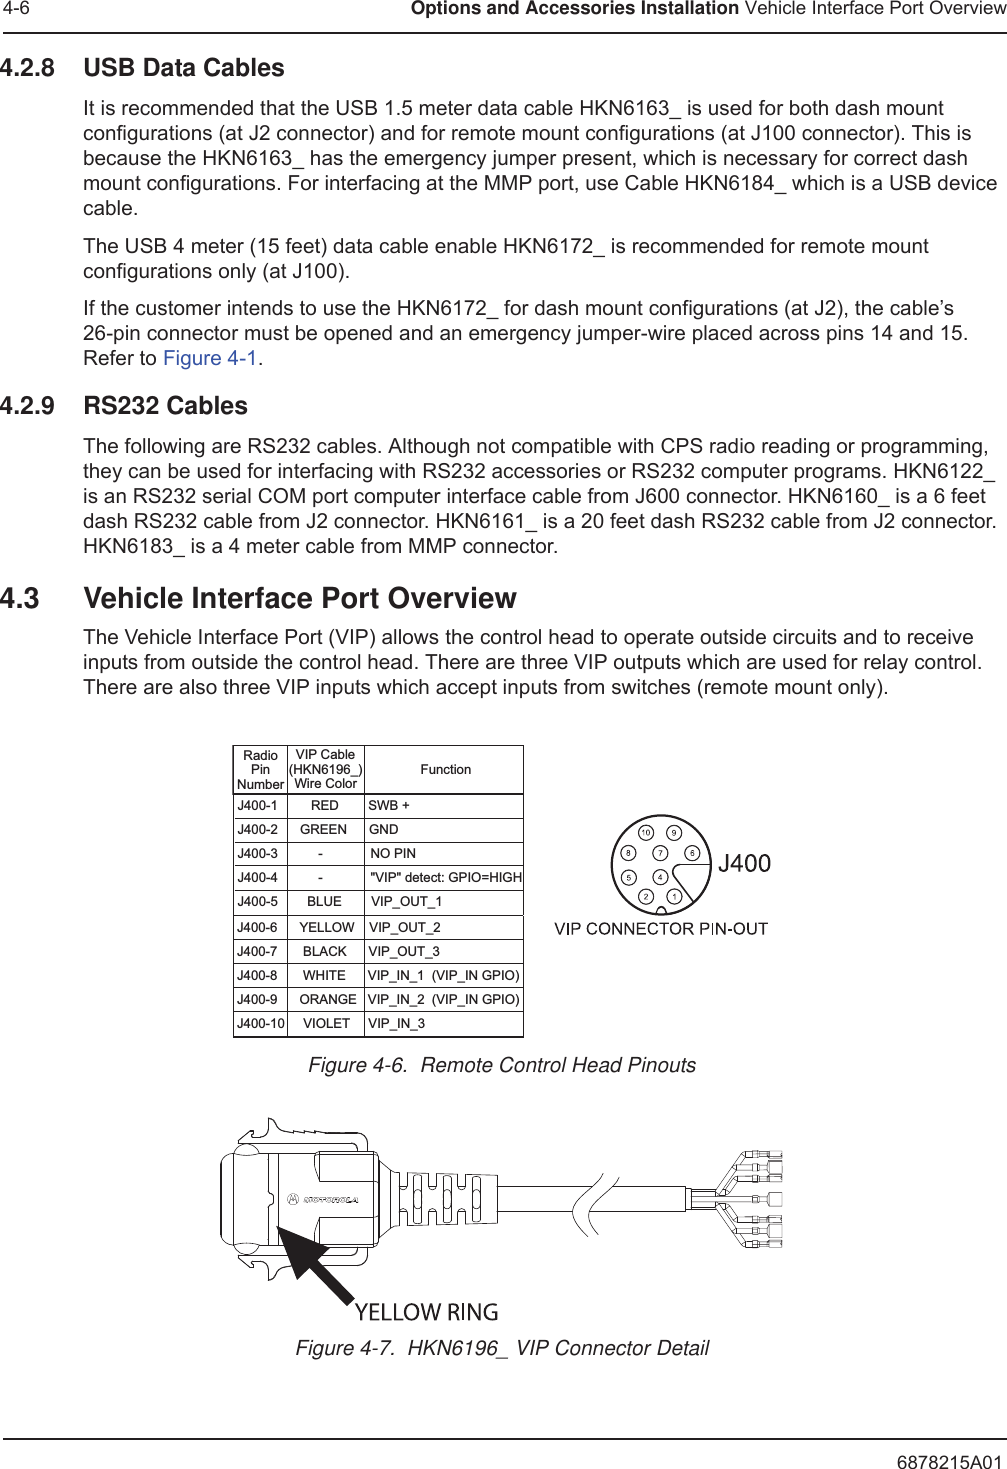 6878215A014-6 Options and Accessories Installation Vehicle Interface Port Overview4.2.8 USB Data CablesIt is recommended that the USB 1.5 meter data cable HKN6163_ is used for both dash mount configurations (at J2 connector) and for remote mount configurations (at J100 connector). This is because the HKN6163_ has the emergency jumper present, which is necessary for correct dash mount configurations. For interfacing at the MMP port, use Cable HKN6184_ which is a USB device cable.The USB 4 meter (15 feet) data cable enable HKN6172_ is recommended for remote mount configurations only (at J100).If the customer intends to use the HKN6172_ for dash mount configurations (at J2), the cable’s 26-pin connector must be opened and an emergency jumper-wire placed across pins 14 and 15. Refer to Figure 4-1.4.2.9 RS232 CablesThe following are RS232 cables. Although not compatible with CPS radio reading or programming, they can be used for interfacing with RS232 accessories or RS232 computer programs. HKN6122_ is an RS232 serial COM port computer interface cable from J600 connector. HKN6160_ is a 6 feet dash RS232 cable from J2 connector. HKN6161_ is a 20 feet dash RS232 cable from J2 connector. HKN6183_ is a 4 meter cable from MMP connector.4.3 Vehicle Interface Port OverviewThe Vehicle Interface Port (VIP) allows the control head to operate outside circuits and to receive inputs from outside the control head. There are three VIP outputs which are used for relay control. There are also three VIP inputs which accept inputs from switches (remote mount only). Figure 4-6.  Remote Control Head PinoutsFigure 4-7.  HKN6196_ VIP Connector DetailJ400-1         RED        SWB +J400-2      GREEN      GNDJ400-3           -             NO PINJ400-4           -             &quot;VIP&quot; detect: GPIO=HIGHJ400-5        BLUE        VIP_OUT_1 J400-6      YELLOW    VIP_OUT_2J400-7       BLACK      VIP_OUT_3J400-8       WHITE      VIP_IN_1  (VIP_IN GPIO)J400-9      ORANGE   VIP_IN_2  (VIP_IN GPIO)J400-10     VIOLET     VIP_IN_3 RadioPinNumberVIP Cable(HKN6196_)Wire ColorFunction